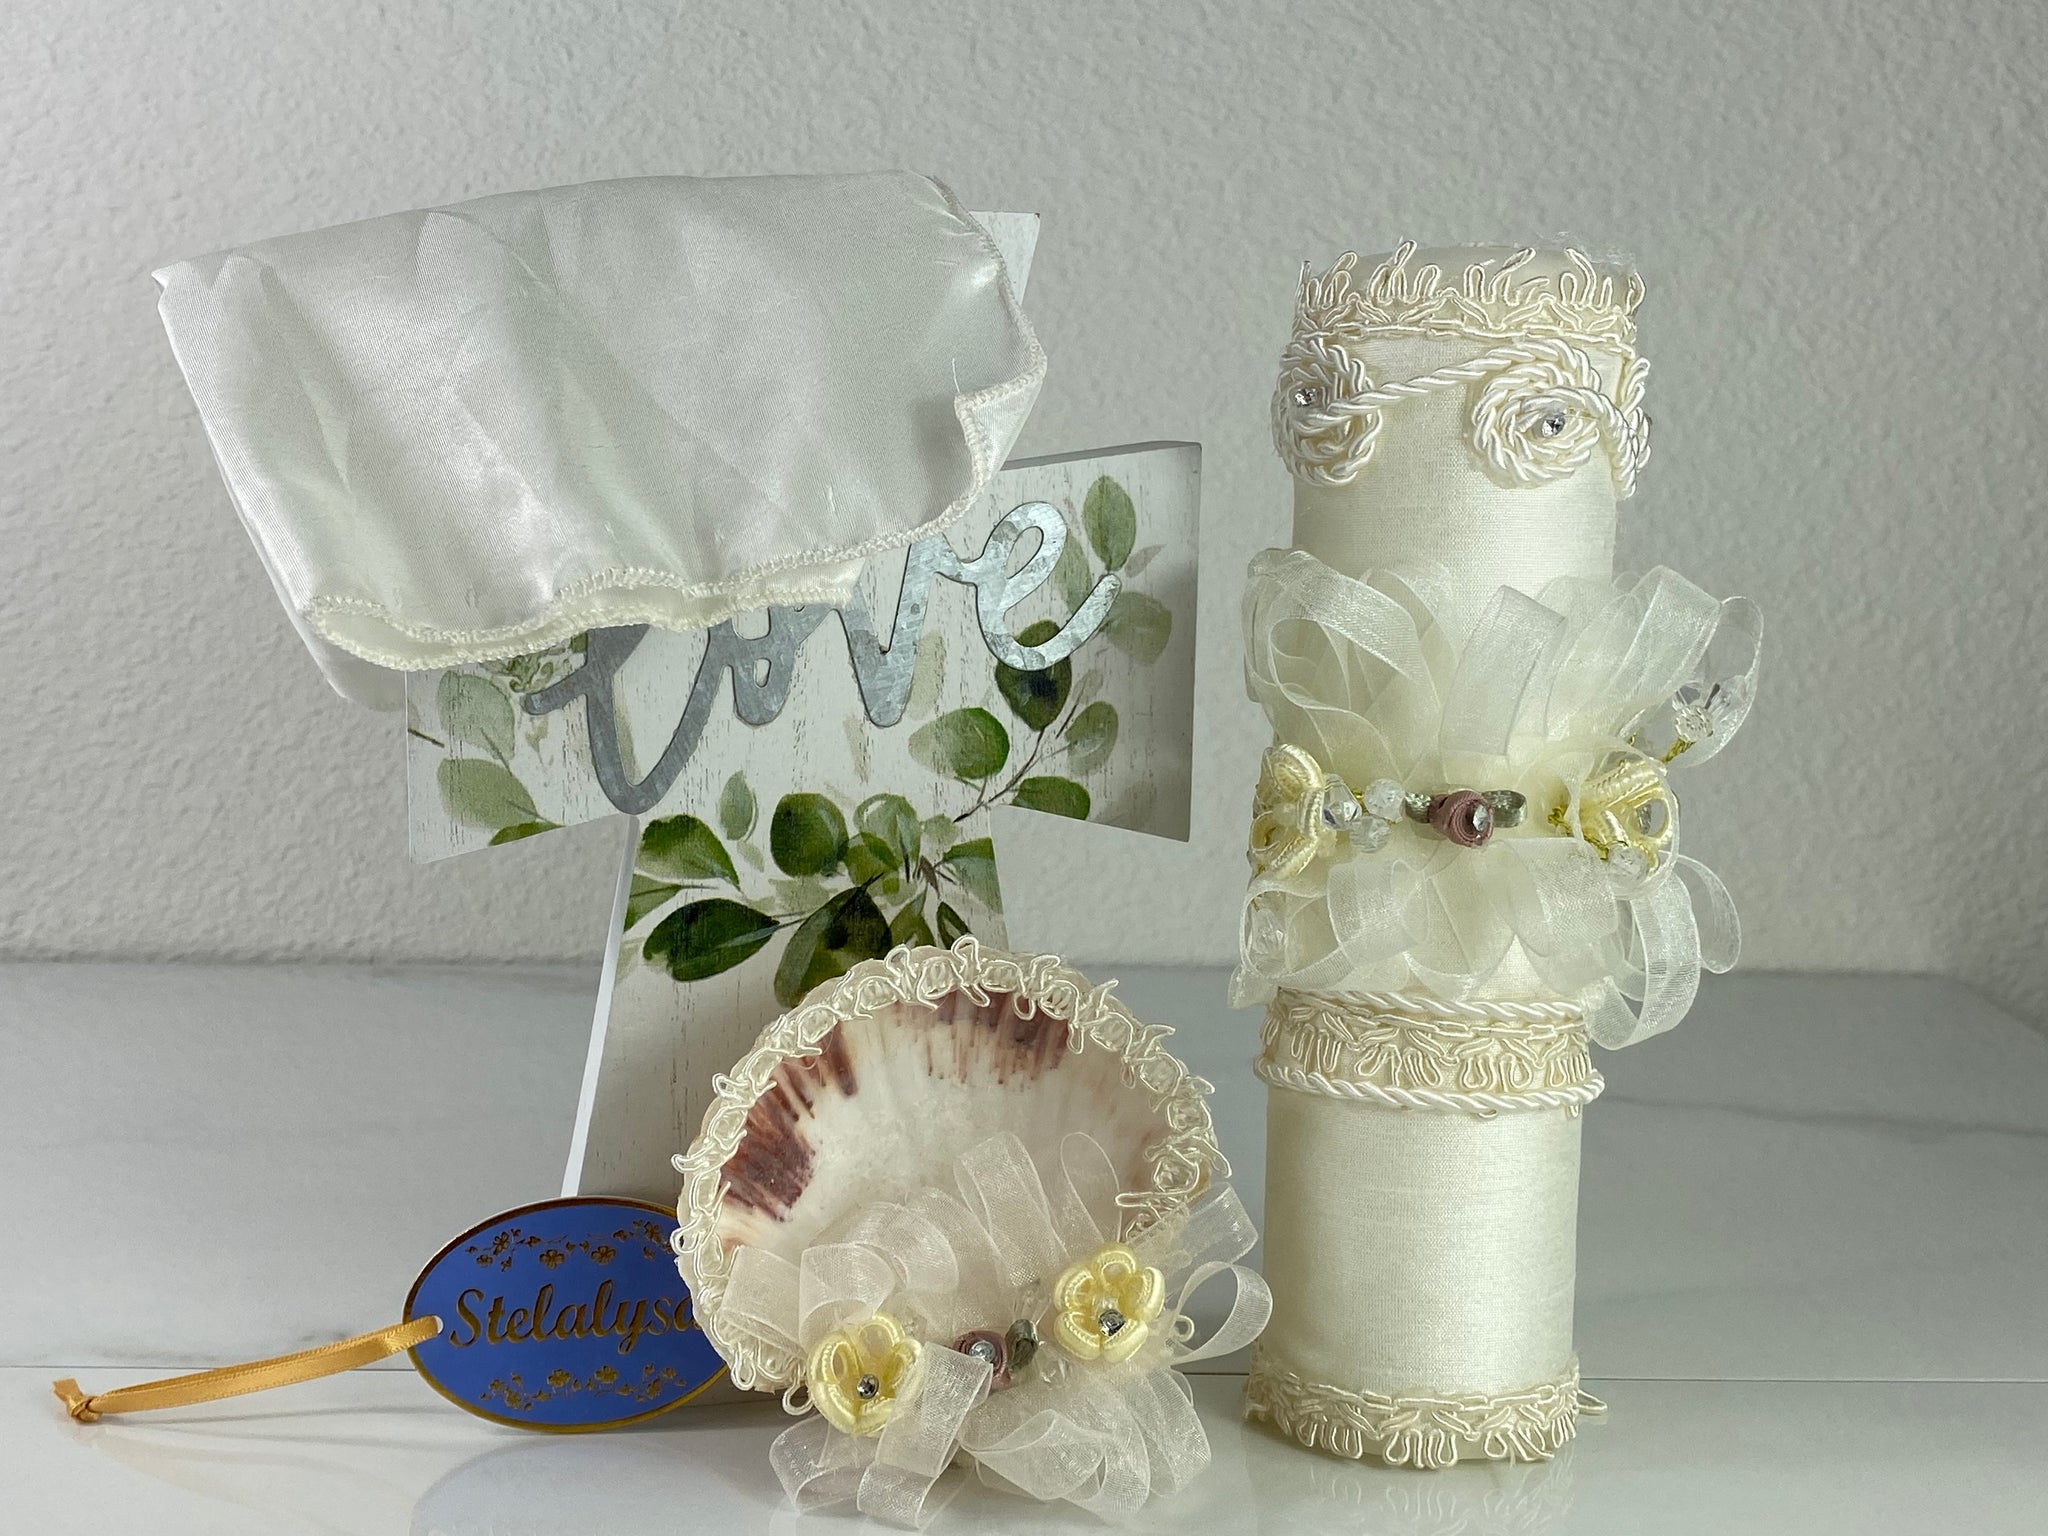 These one-of-a-kind Candle set is handmade and ivory in color.  This candle has a classic look.   It is uniquely decorated with crystals, lace, cross, and tassels making it a gorgeous keepsake.   This candle is cylinder in shape and matches many outfits from the Boys' Baptism Collection.    To match, the Shell is put together piece by piece to compliment the Candle and Handkerchief.  The Handkerchief is made of satin to match the Shell and Candle beautifully.  